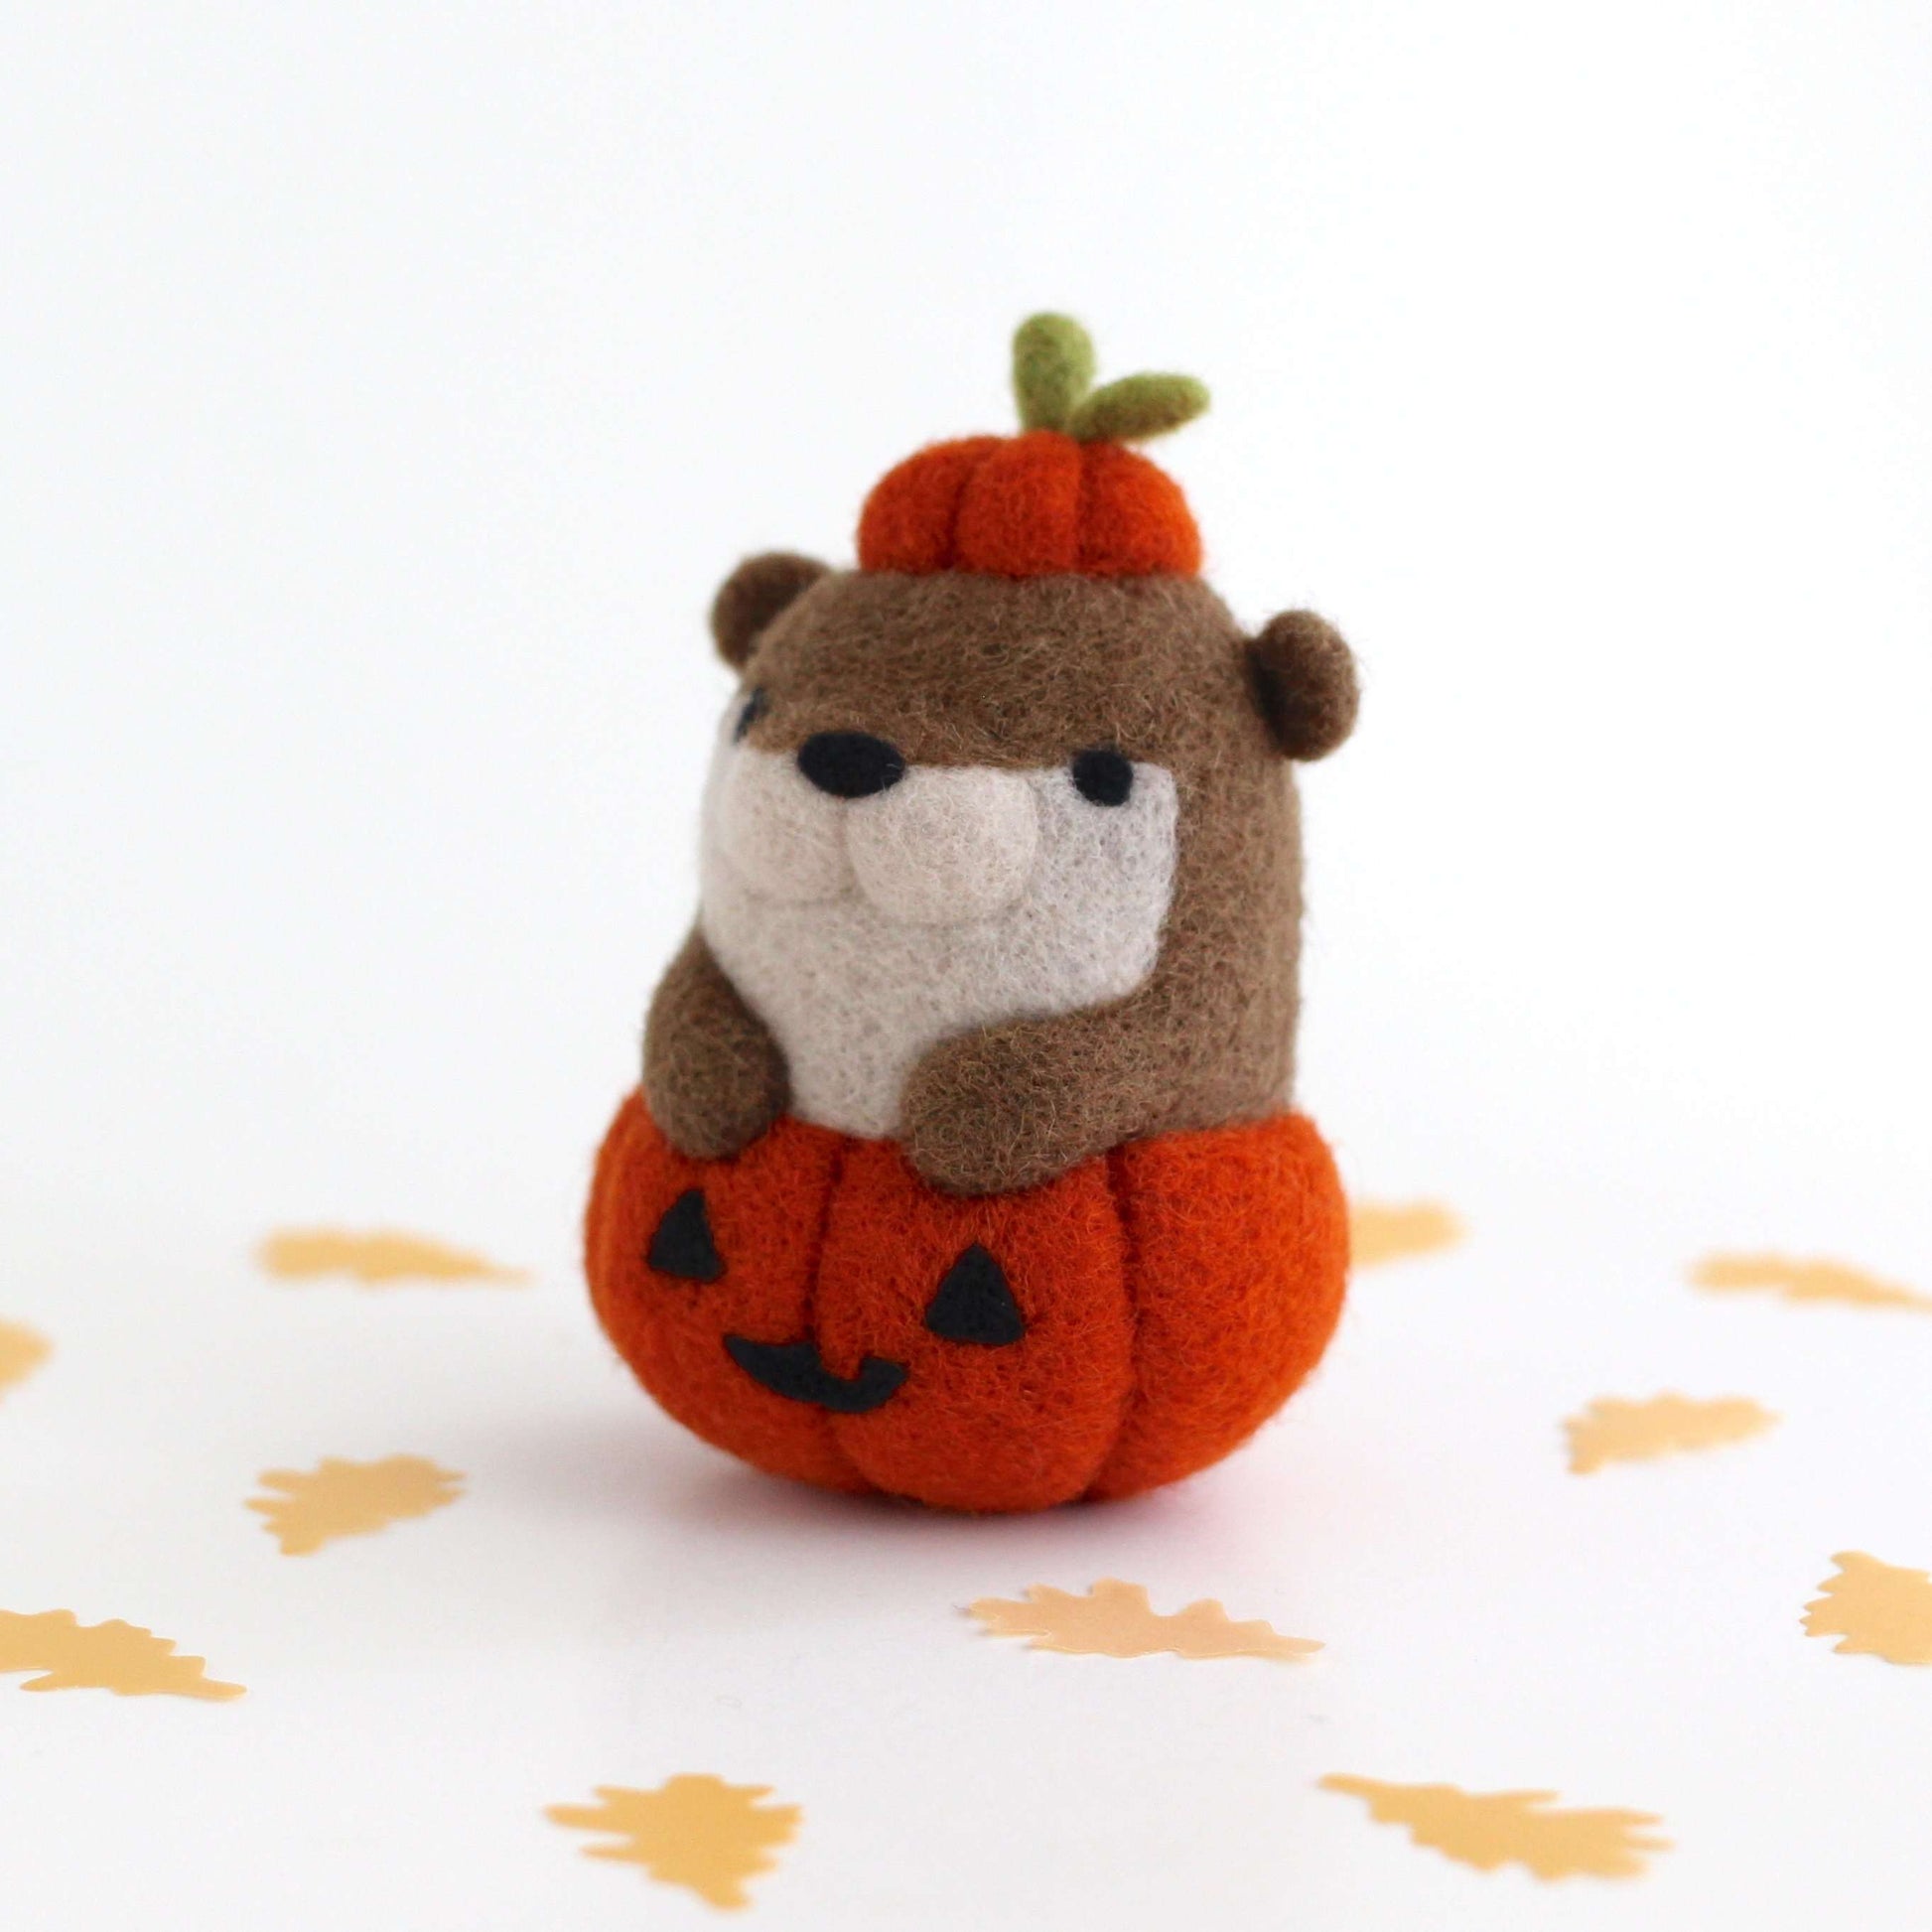 Needle Felted Otter in Jack-o'-Lantern by Wild Whimsy Woolies